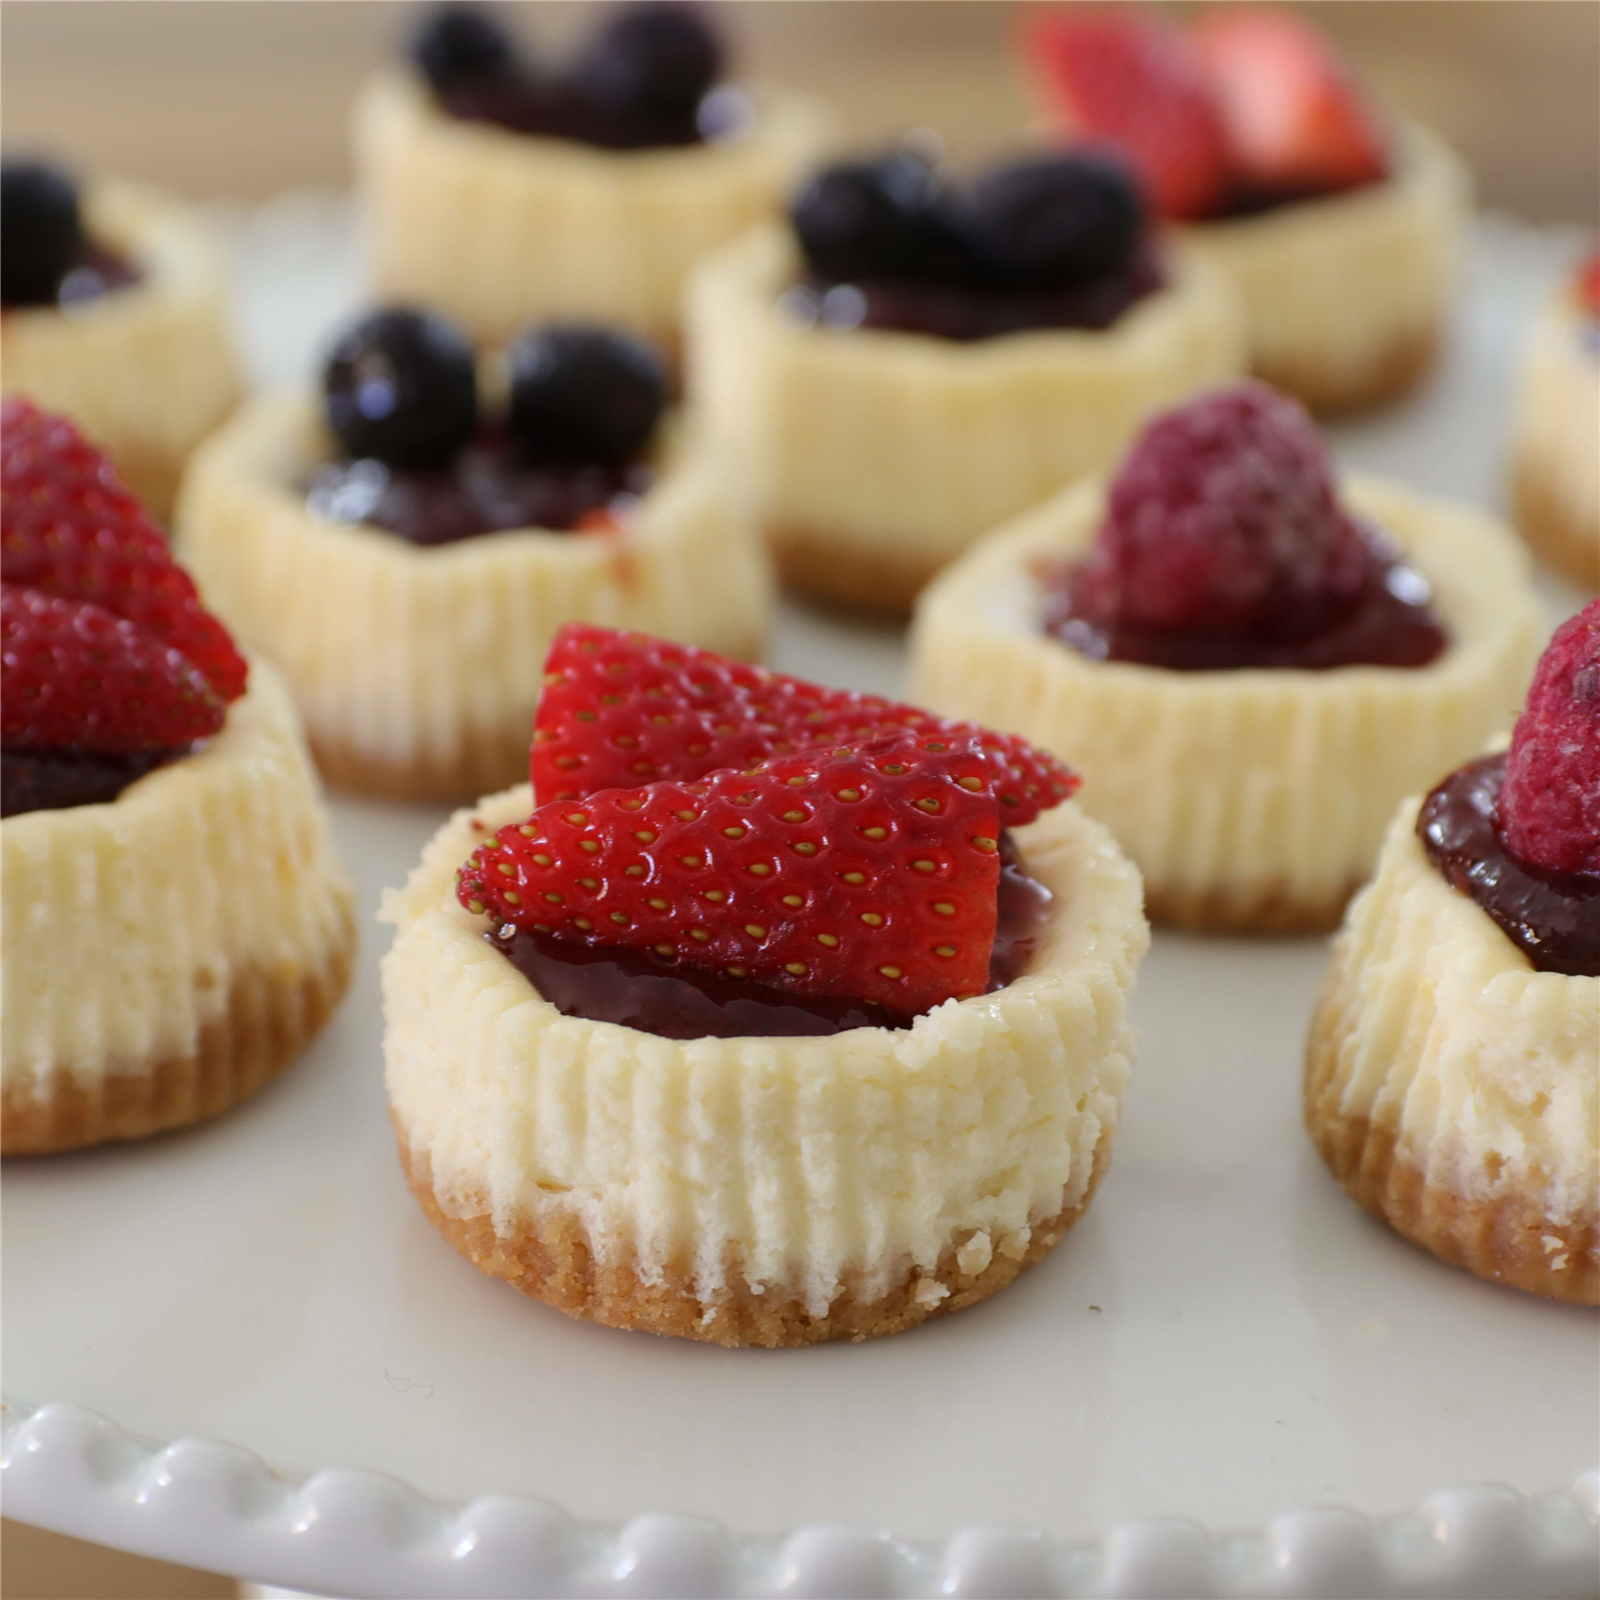 Mini Cheesecake Recipe (Healthier + GF) - Confessions of a Fit Foodie